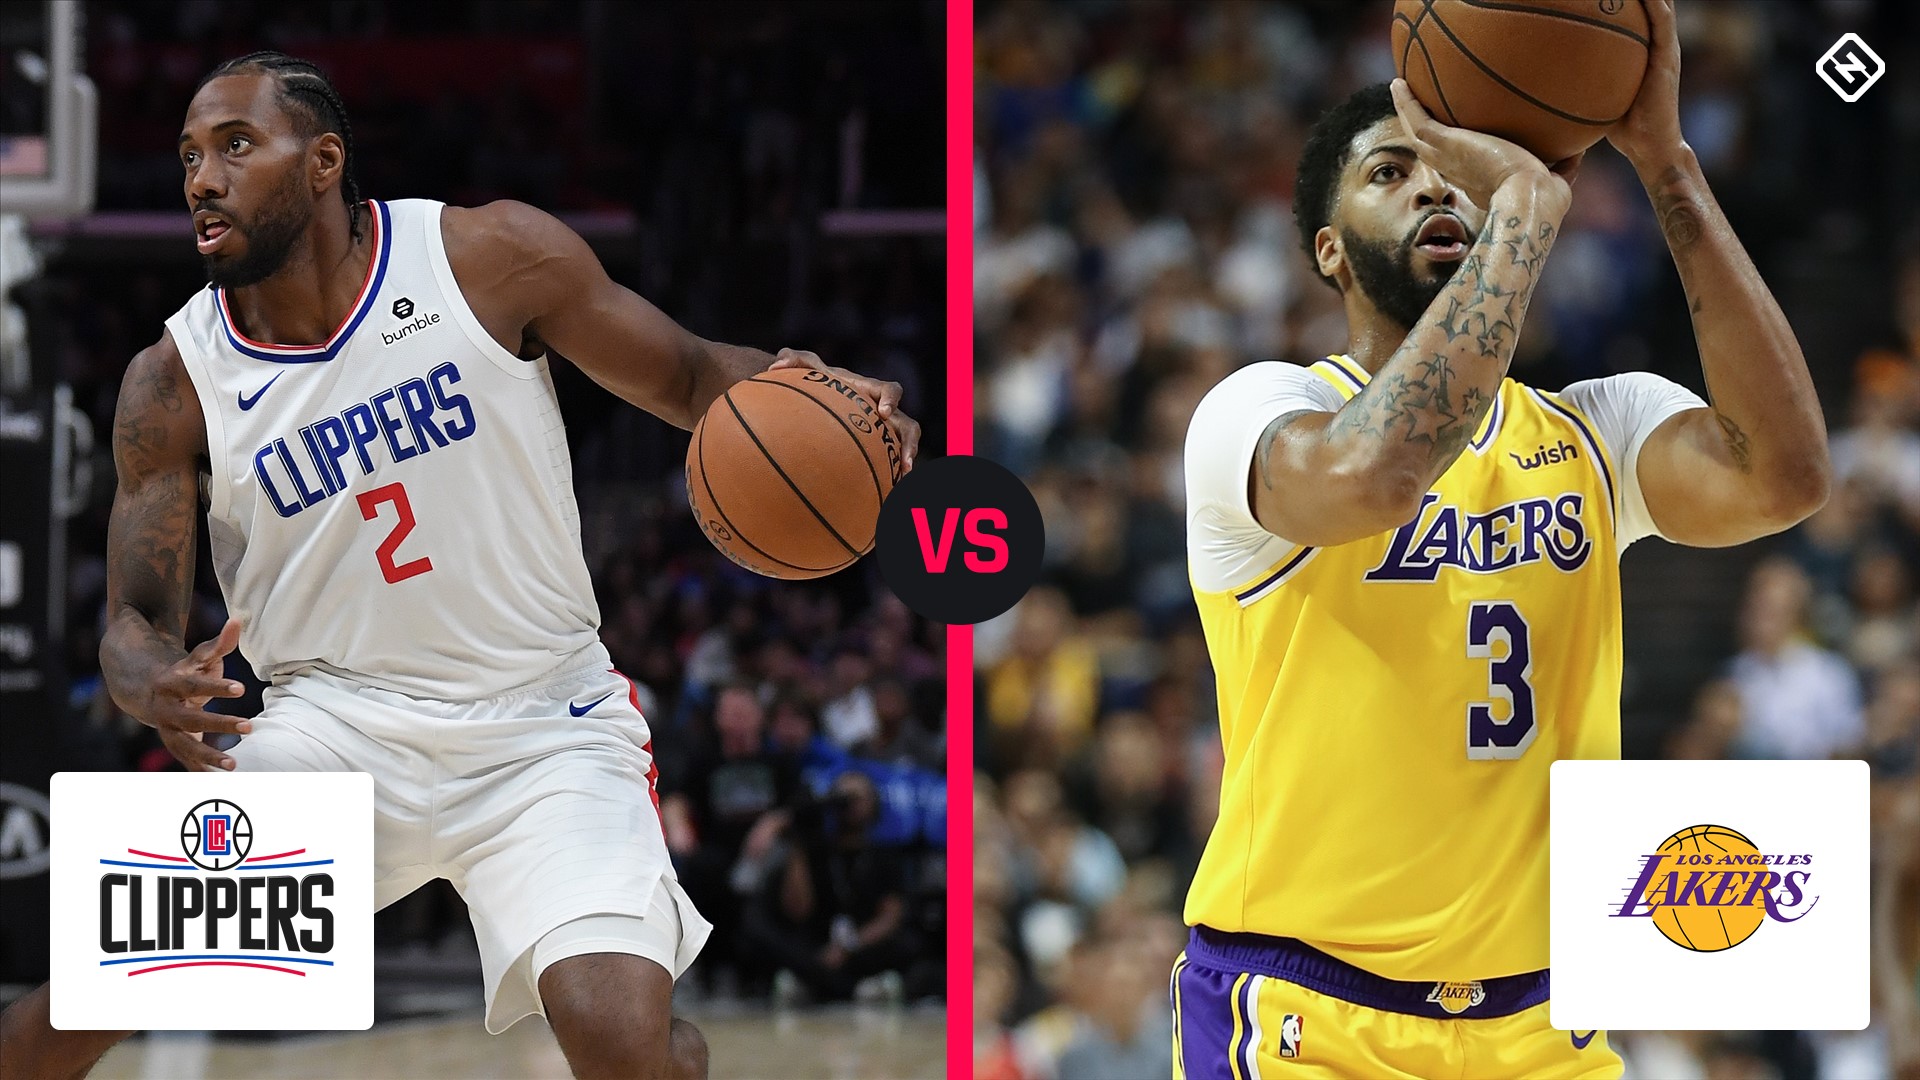 Lakers vs. Clippers: Live score, updates, highlights from NBA Tip-Off 2019 | Sporting News1920 x 1080